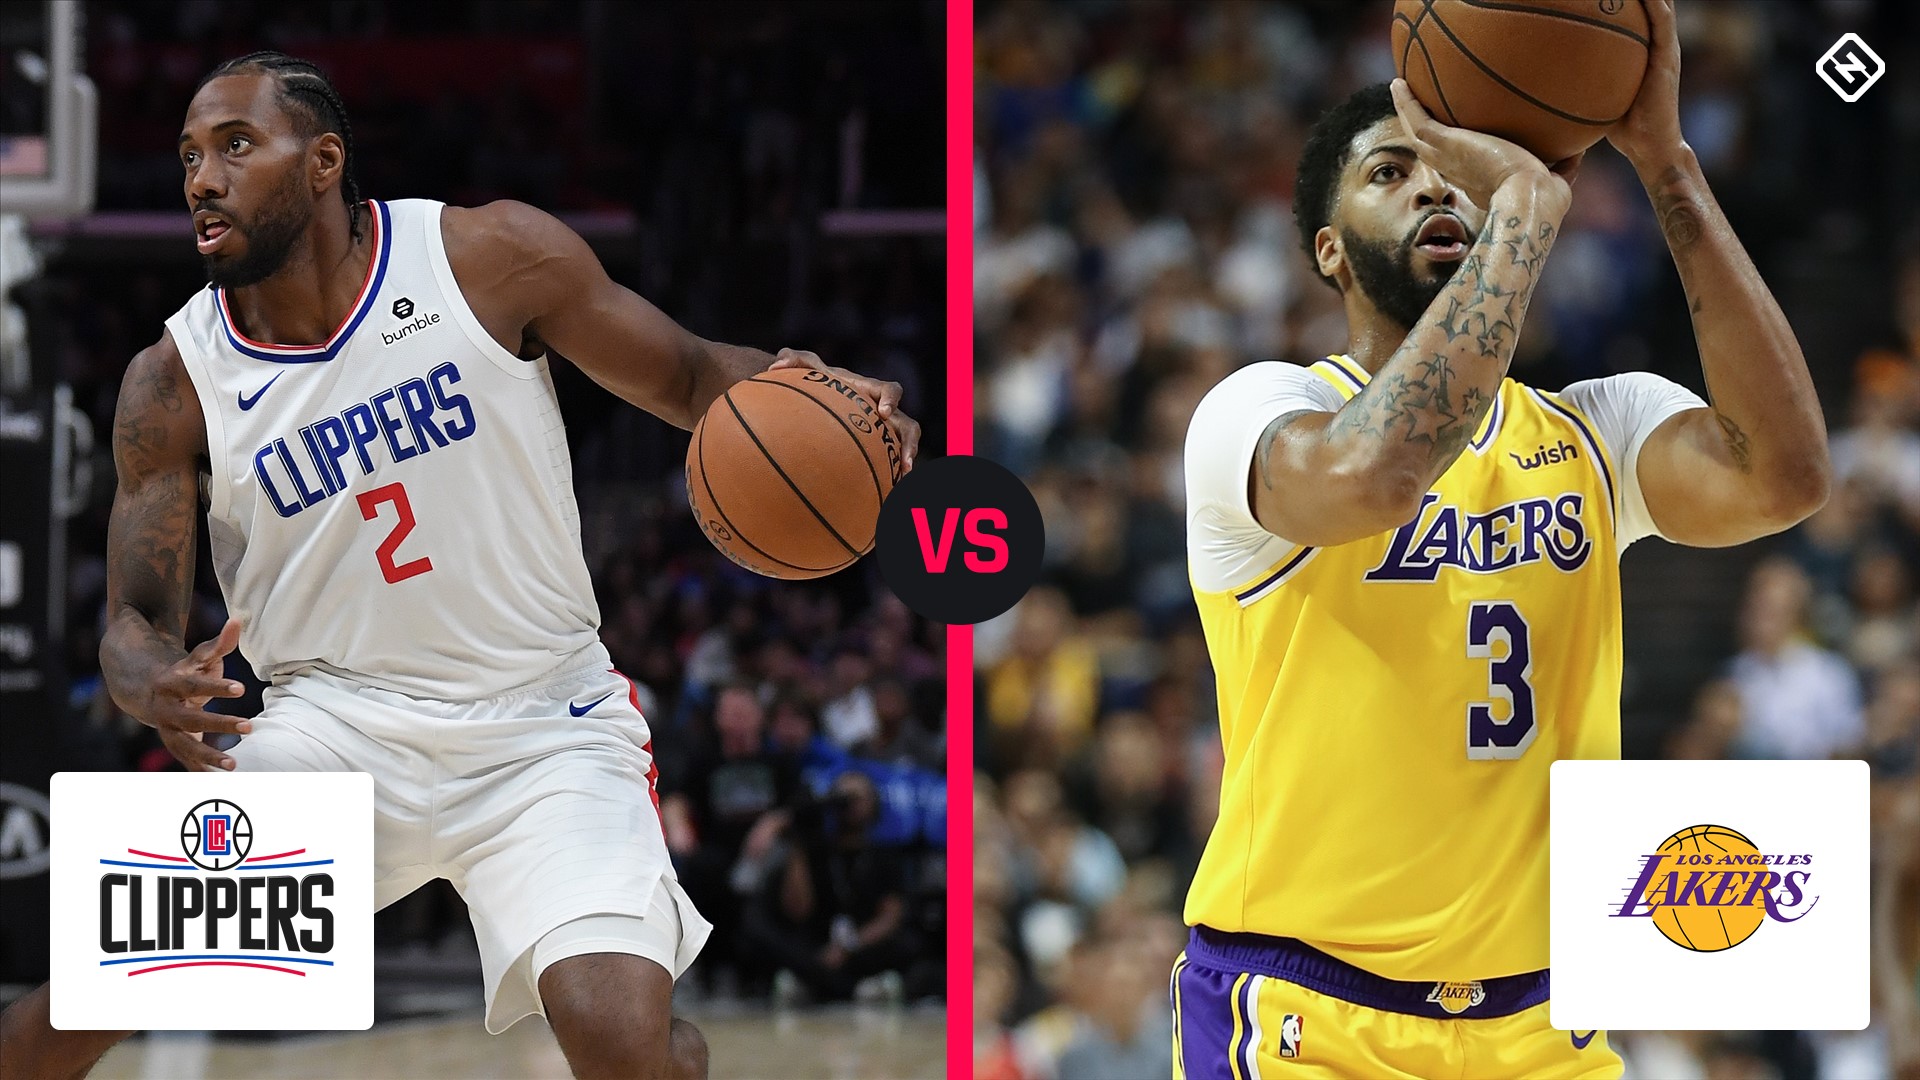 Lakers vs. Clippers: Live score, updates, highlights from NBA Tip-Off 2019 | Sporting News1920 x 1080